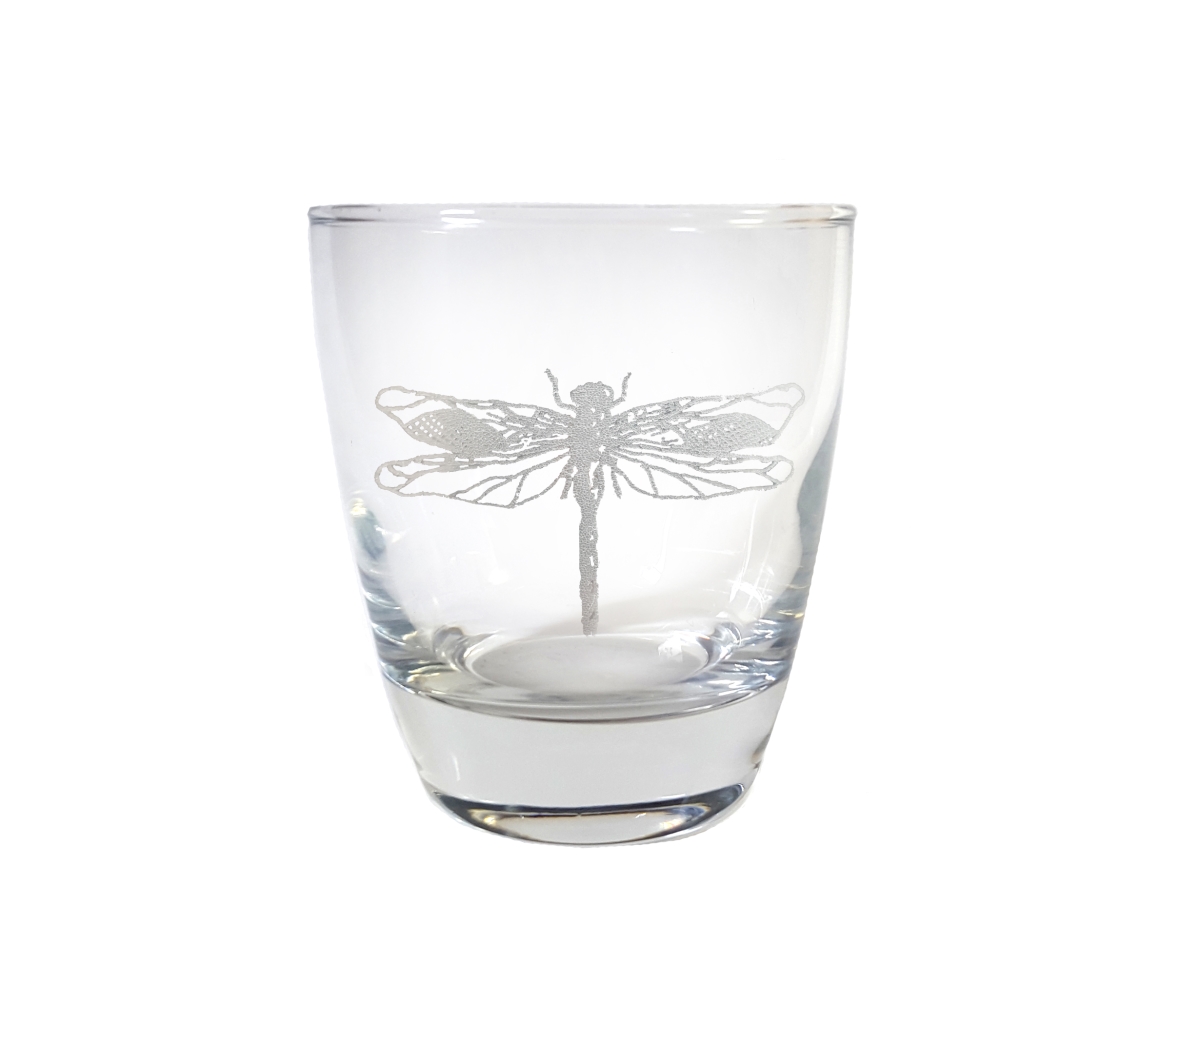 Picture of Lyoncraft LBDF02 10 oz Dragonfly Triskelion Engraved Lowball Glass